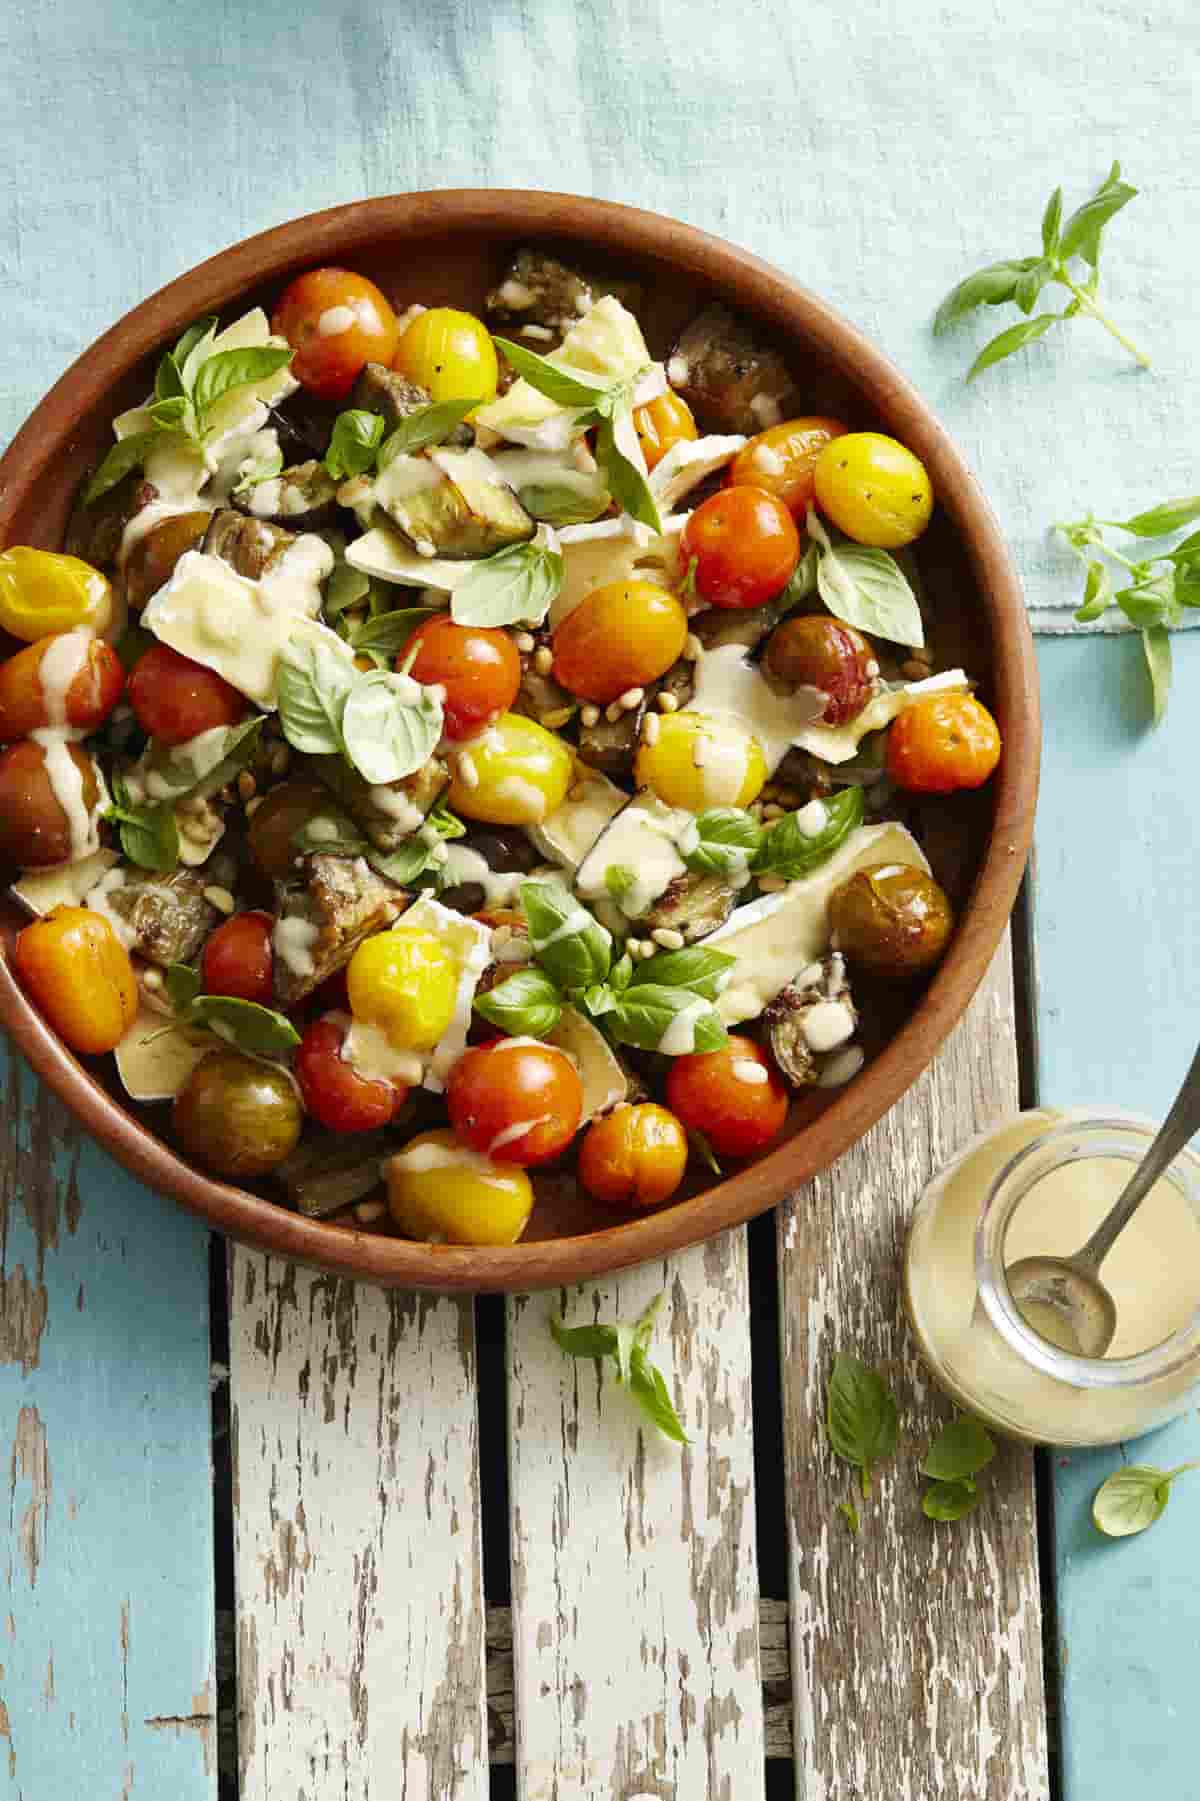 Medley of Tomatoes, Brie & Eggplant Salad in a Bowl.